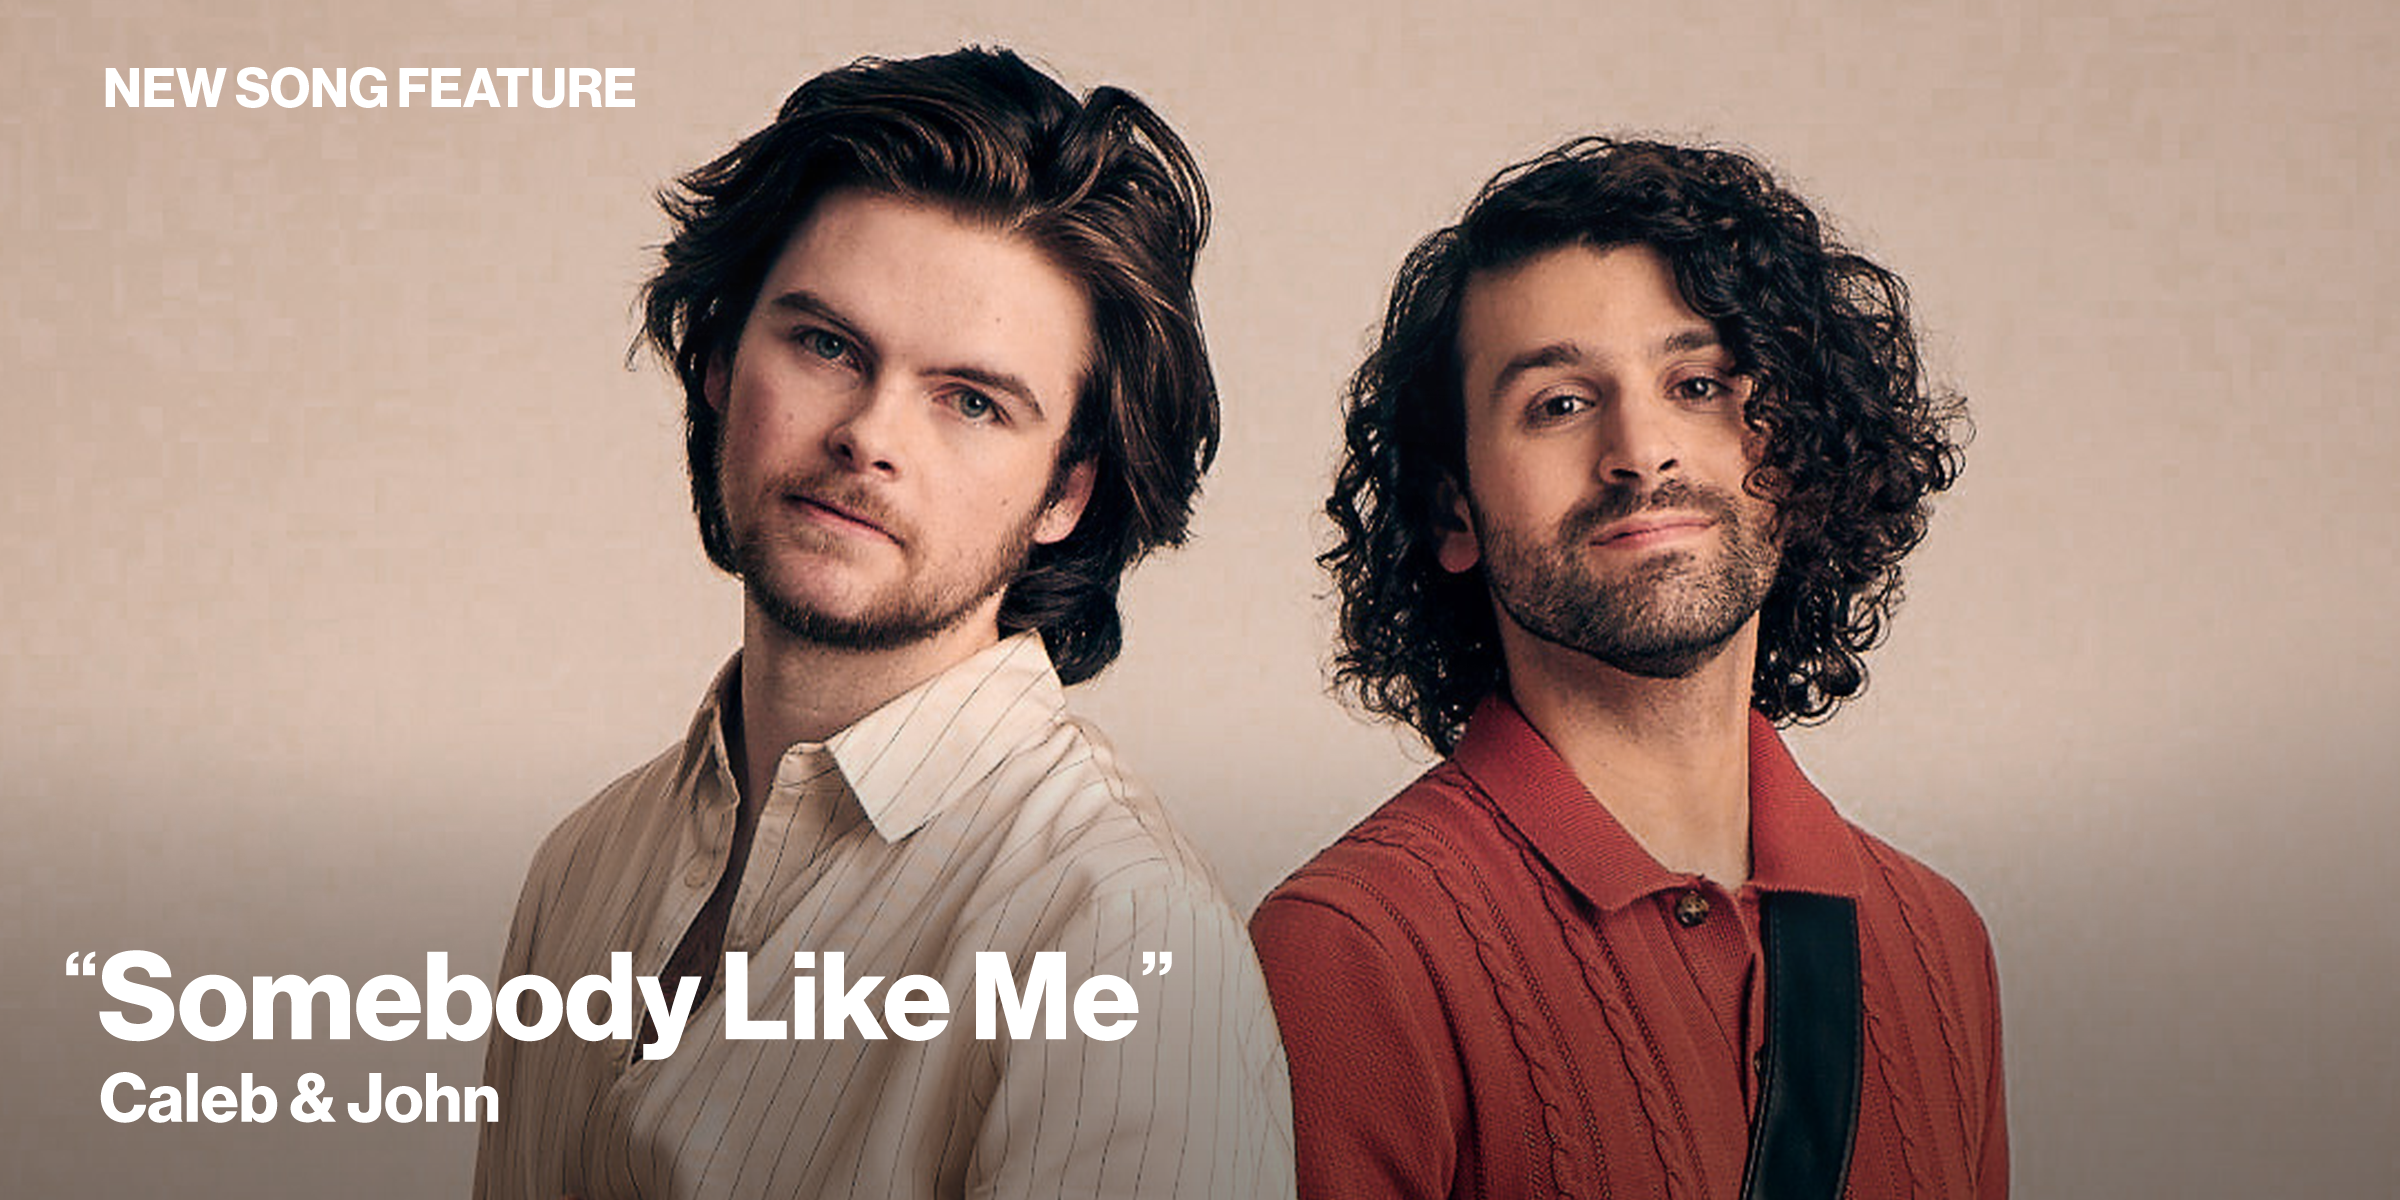 New Song Feature: "Somebody Like Me" Caleb & John